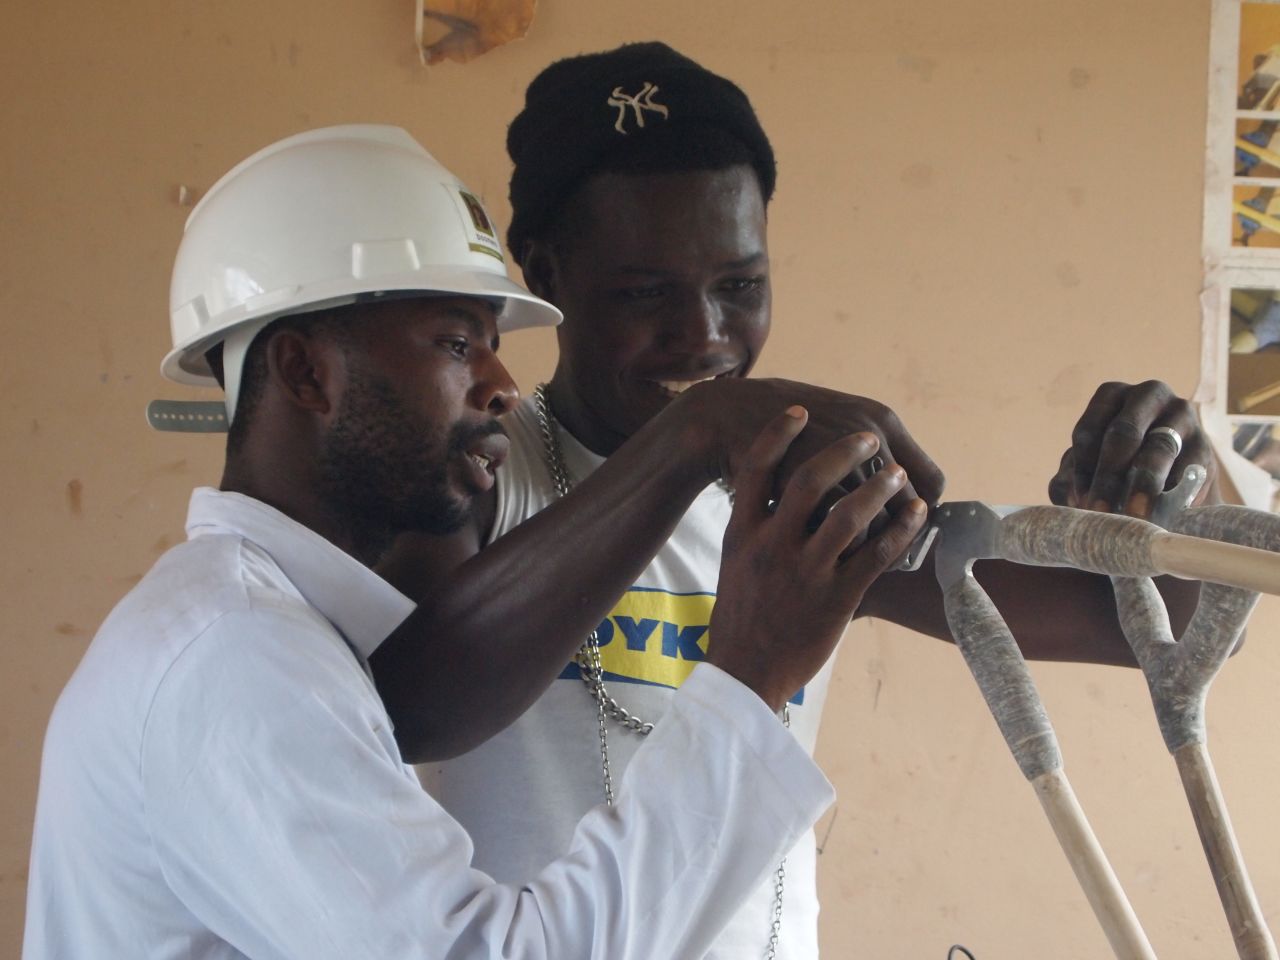 Booomers International founder Kwabena Danso takes his youth teams through the entire manufacturing process -- from harvesting of bamboo through to the final assembly of bespoke bicycles.